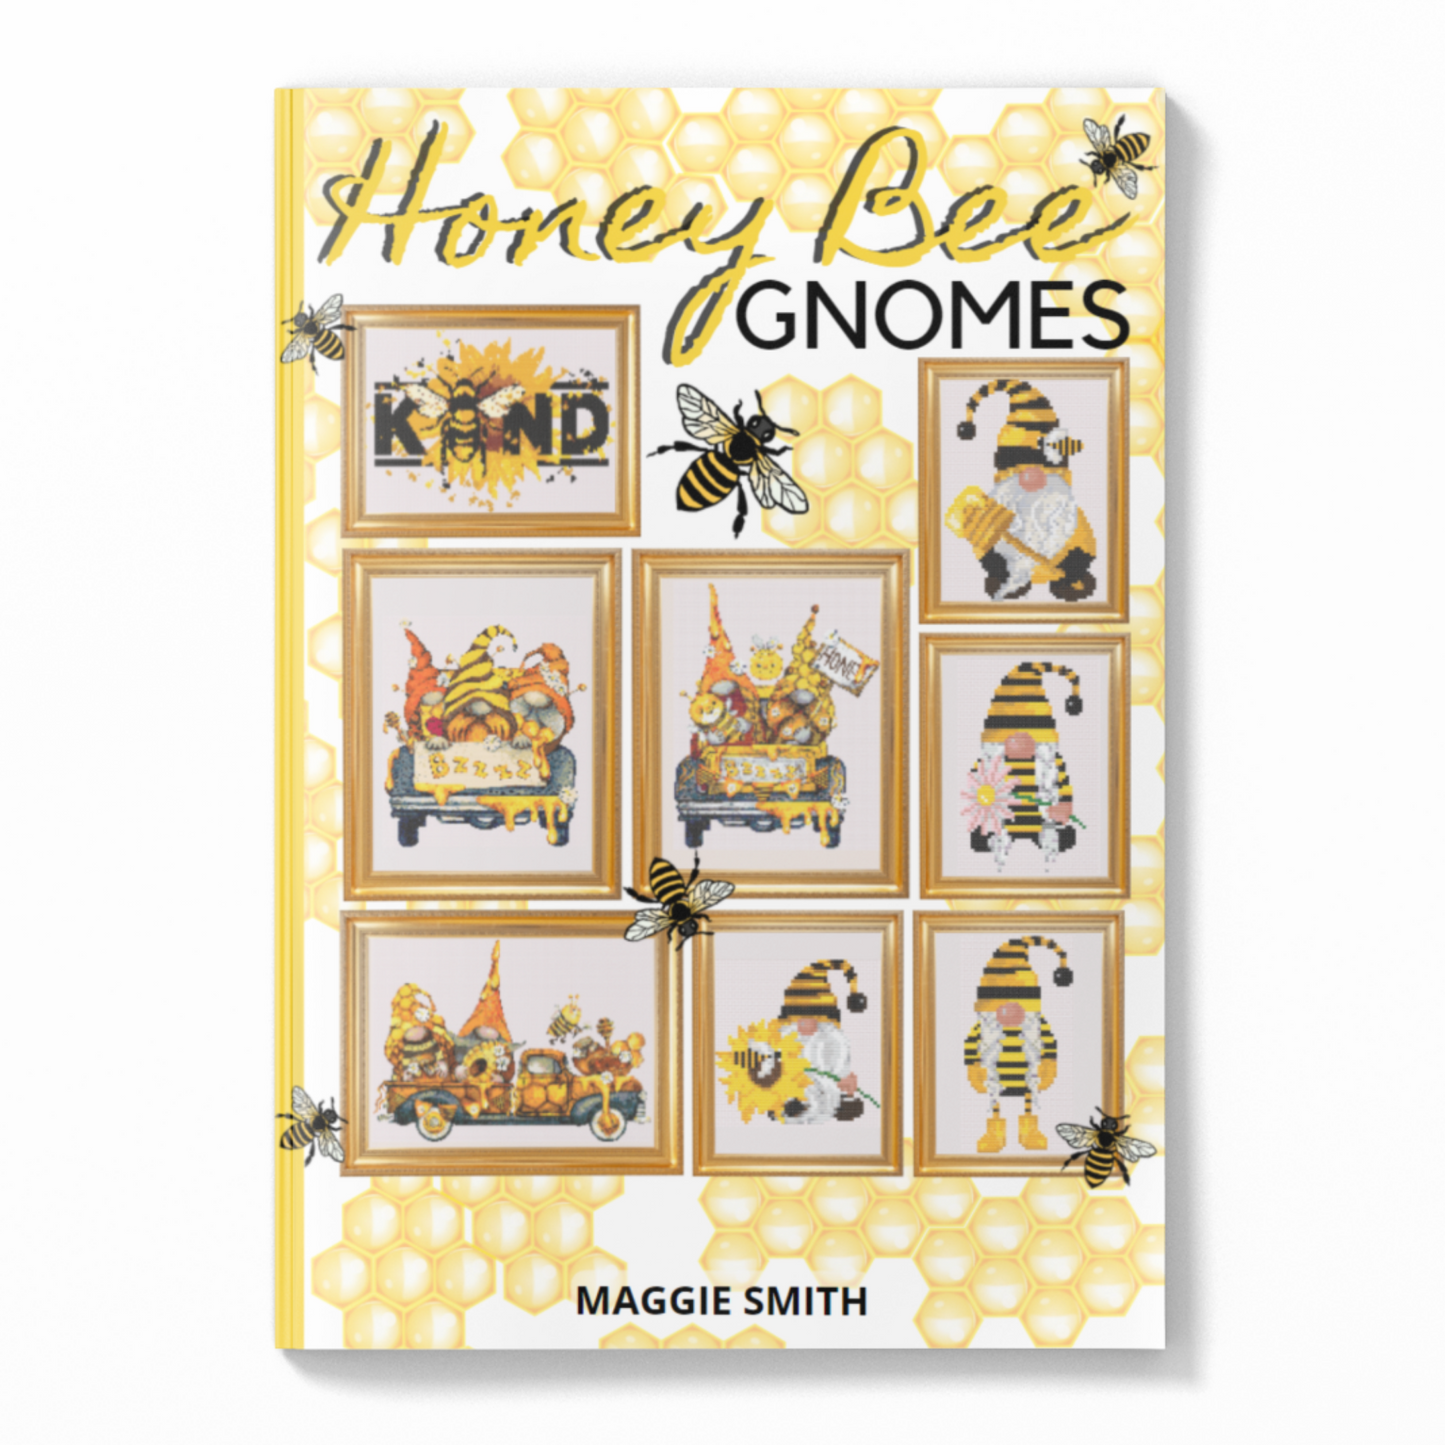 A wonderful collection of Honey Bee Gnomes Counted Cross Stitch Patterns.  Easy to read needlepoint charts, perfect for all experience levels. Great designs for spring and summer stitching.